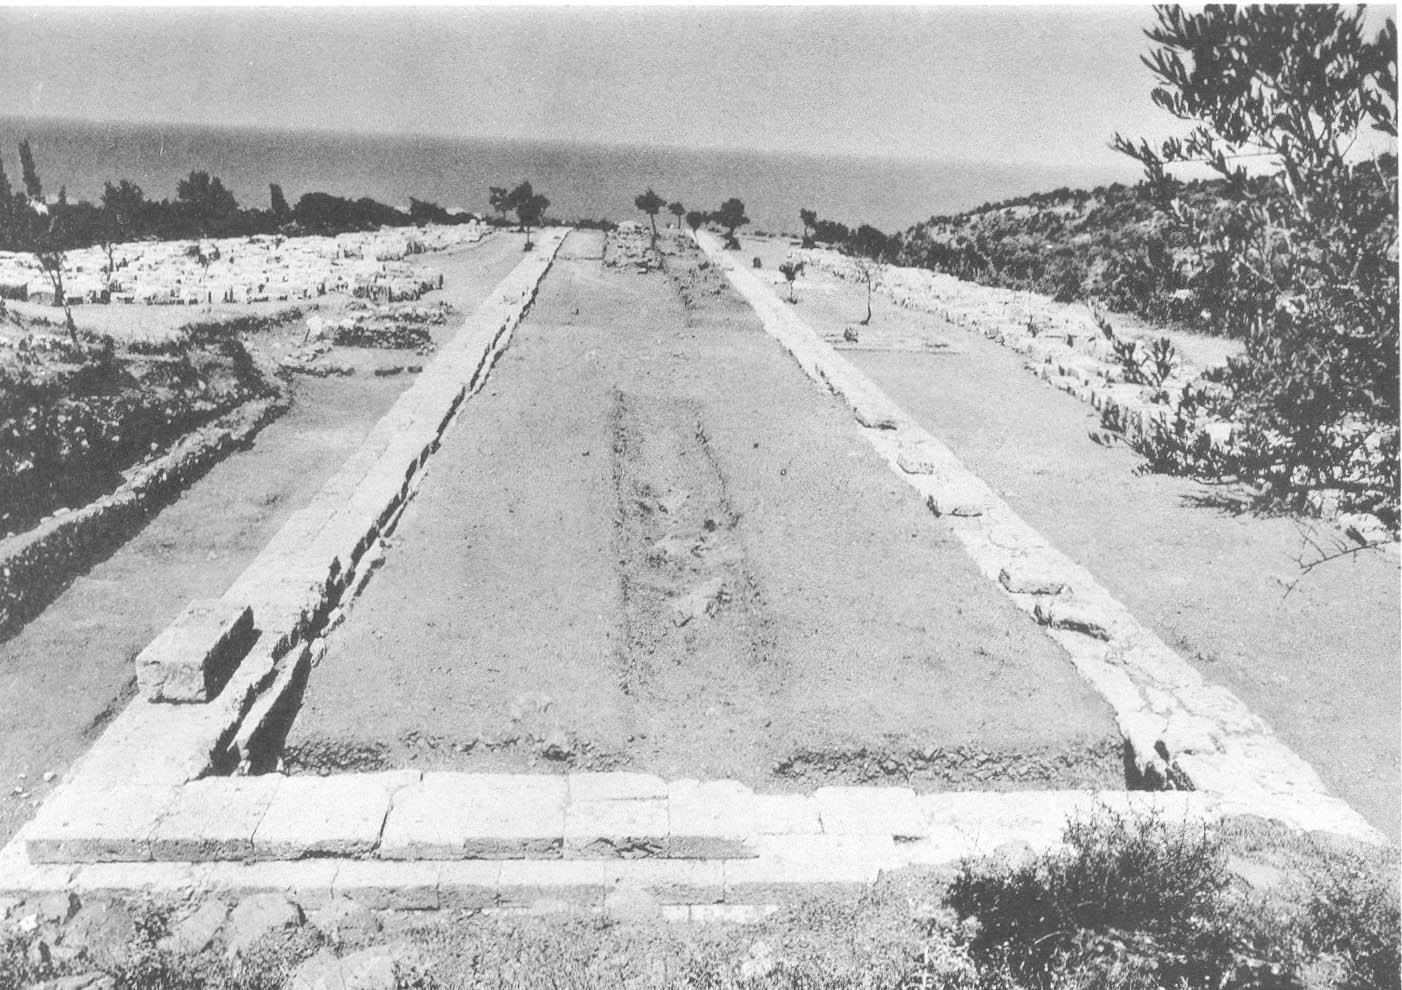 Stoa when first excavated in 1964.